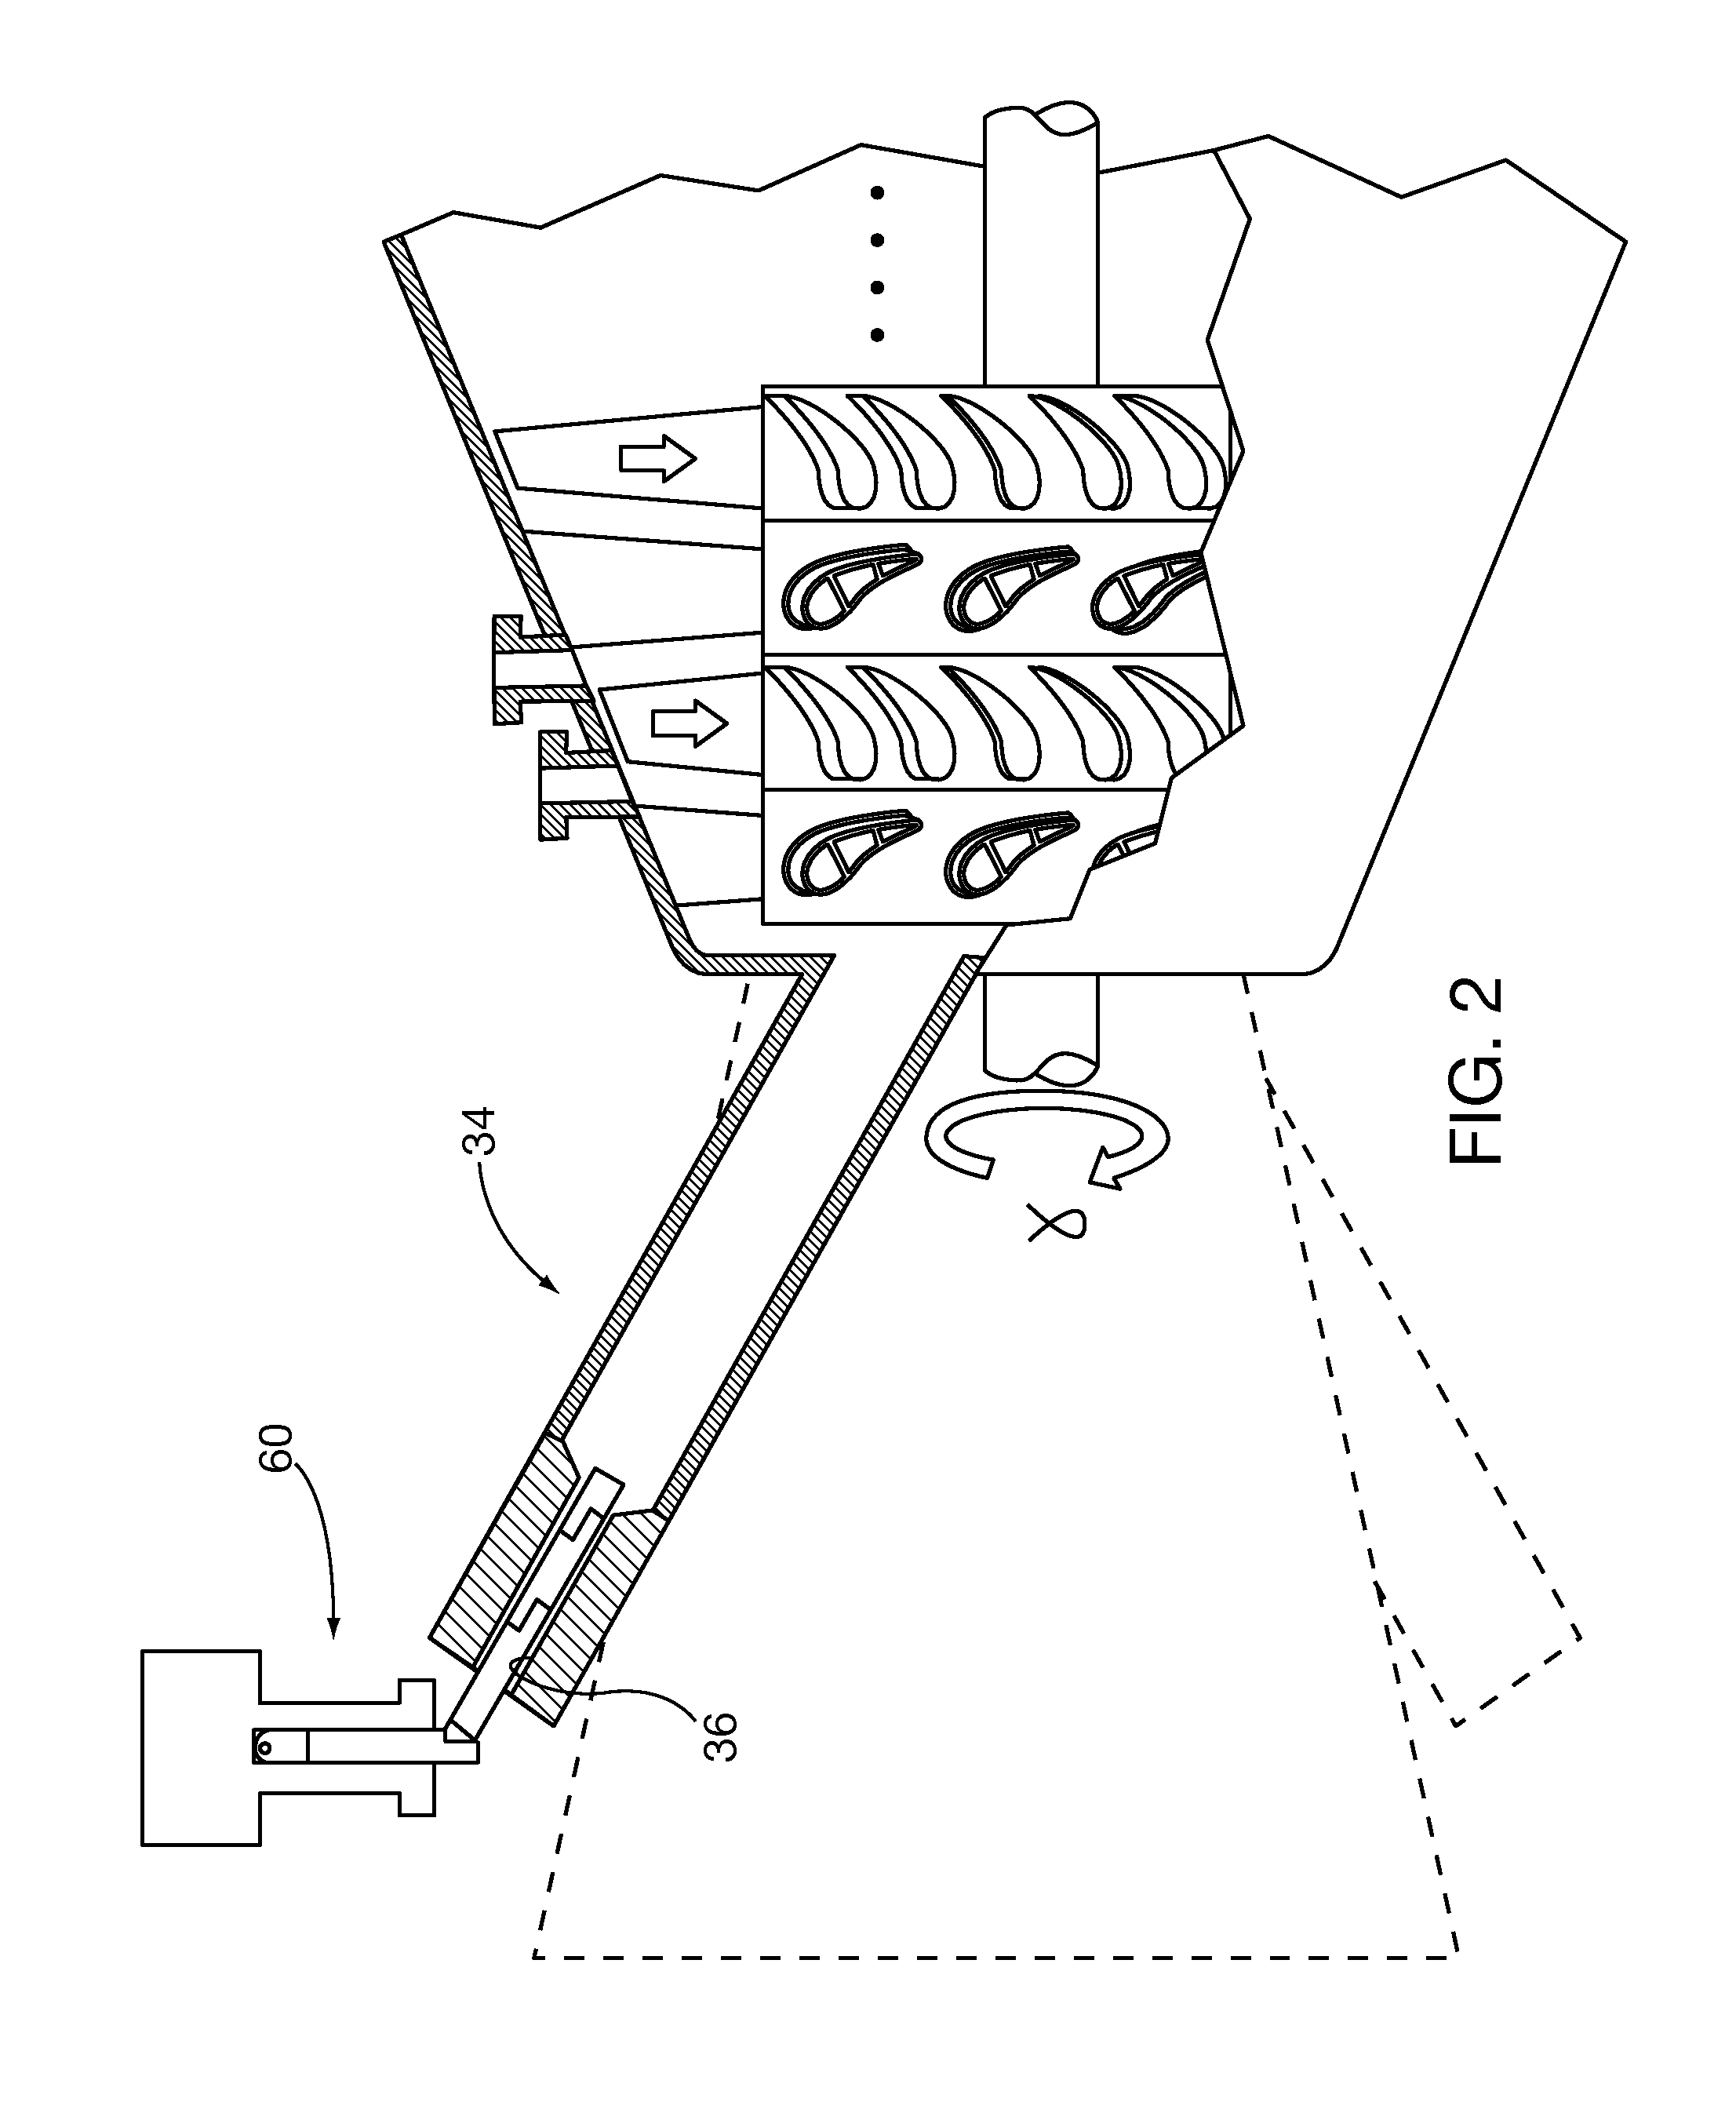 System and method for automated optical inspection of industrial gas turbines and other power generation machinery